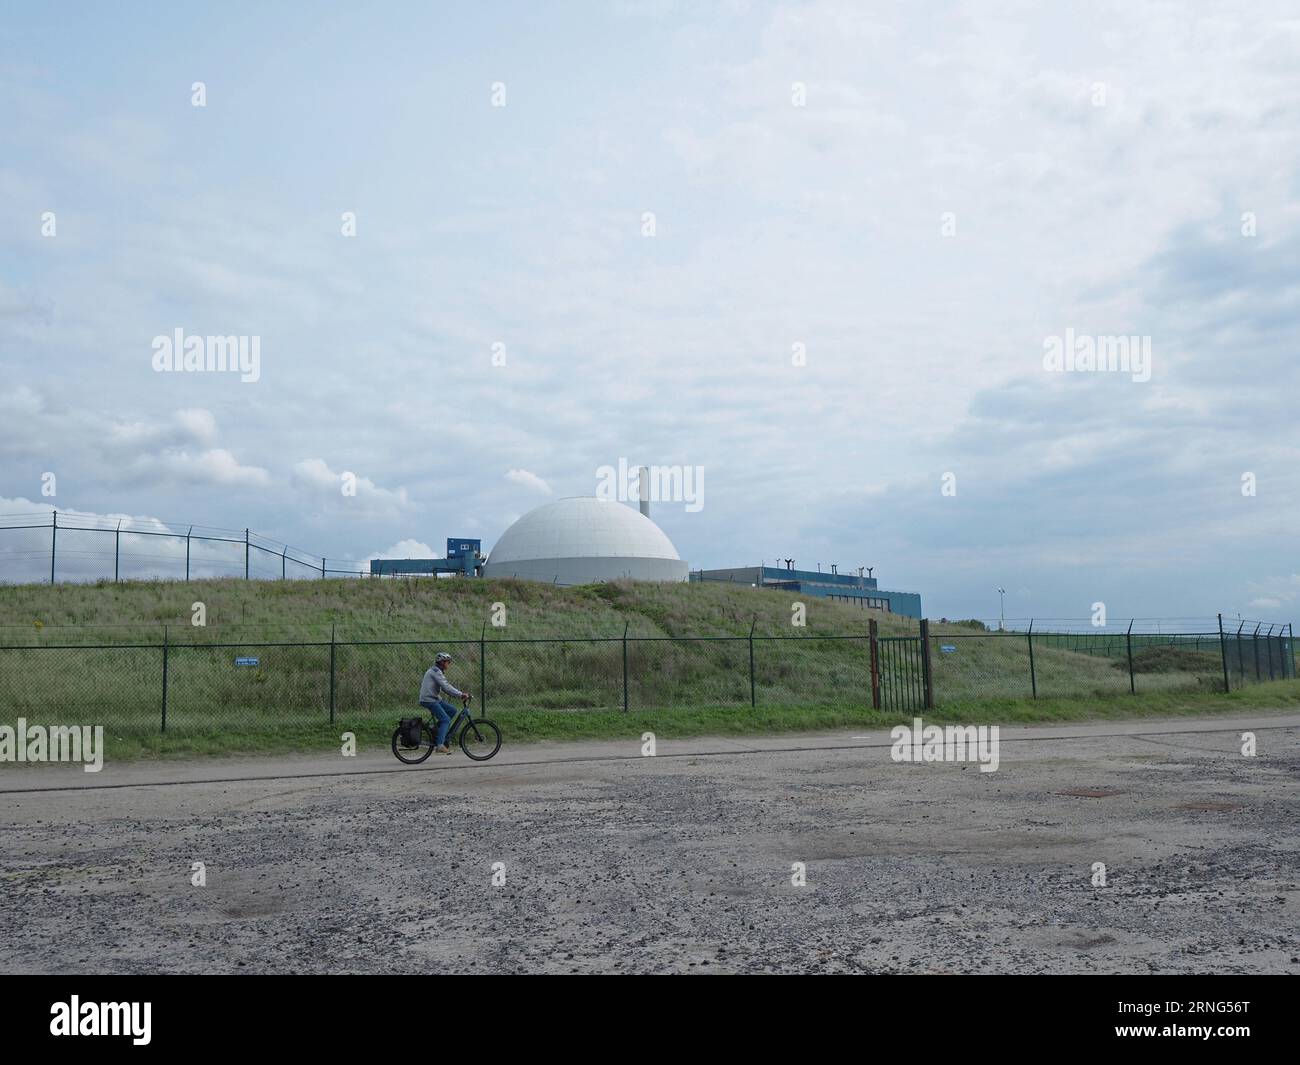 Borssele nuclear power plant on the Westerschelde coast in Borssele, Zeeland, the Netherlands with cyclist passing Stock Photo